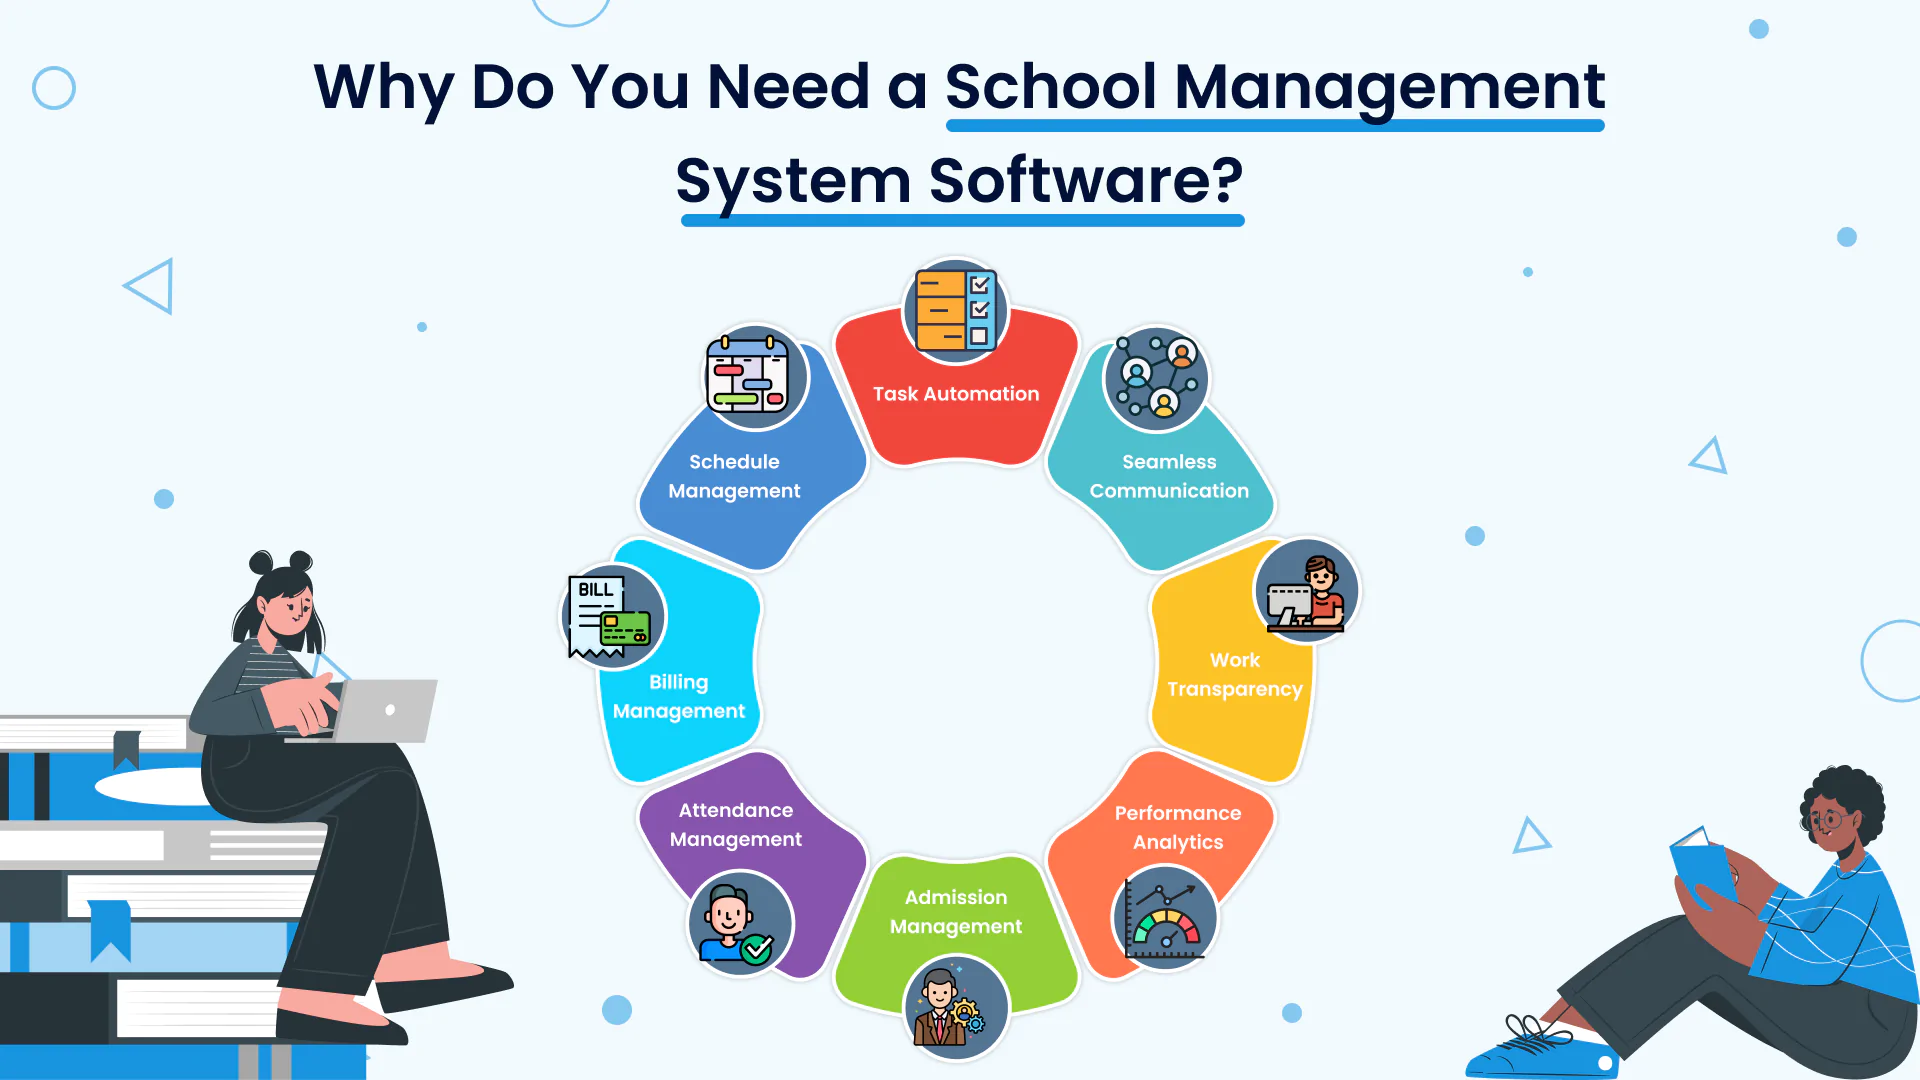 Why Do You Need a School Management System Software